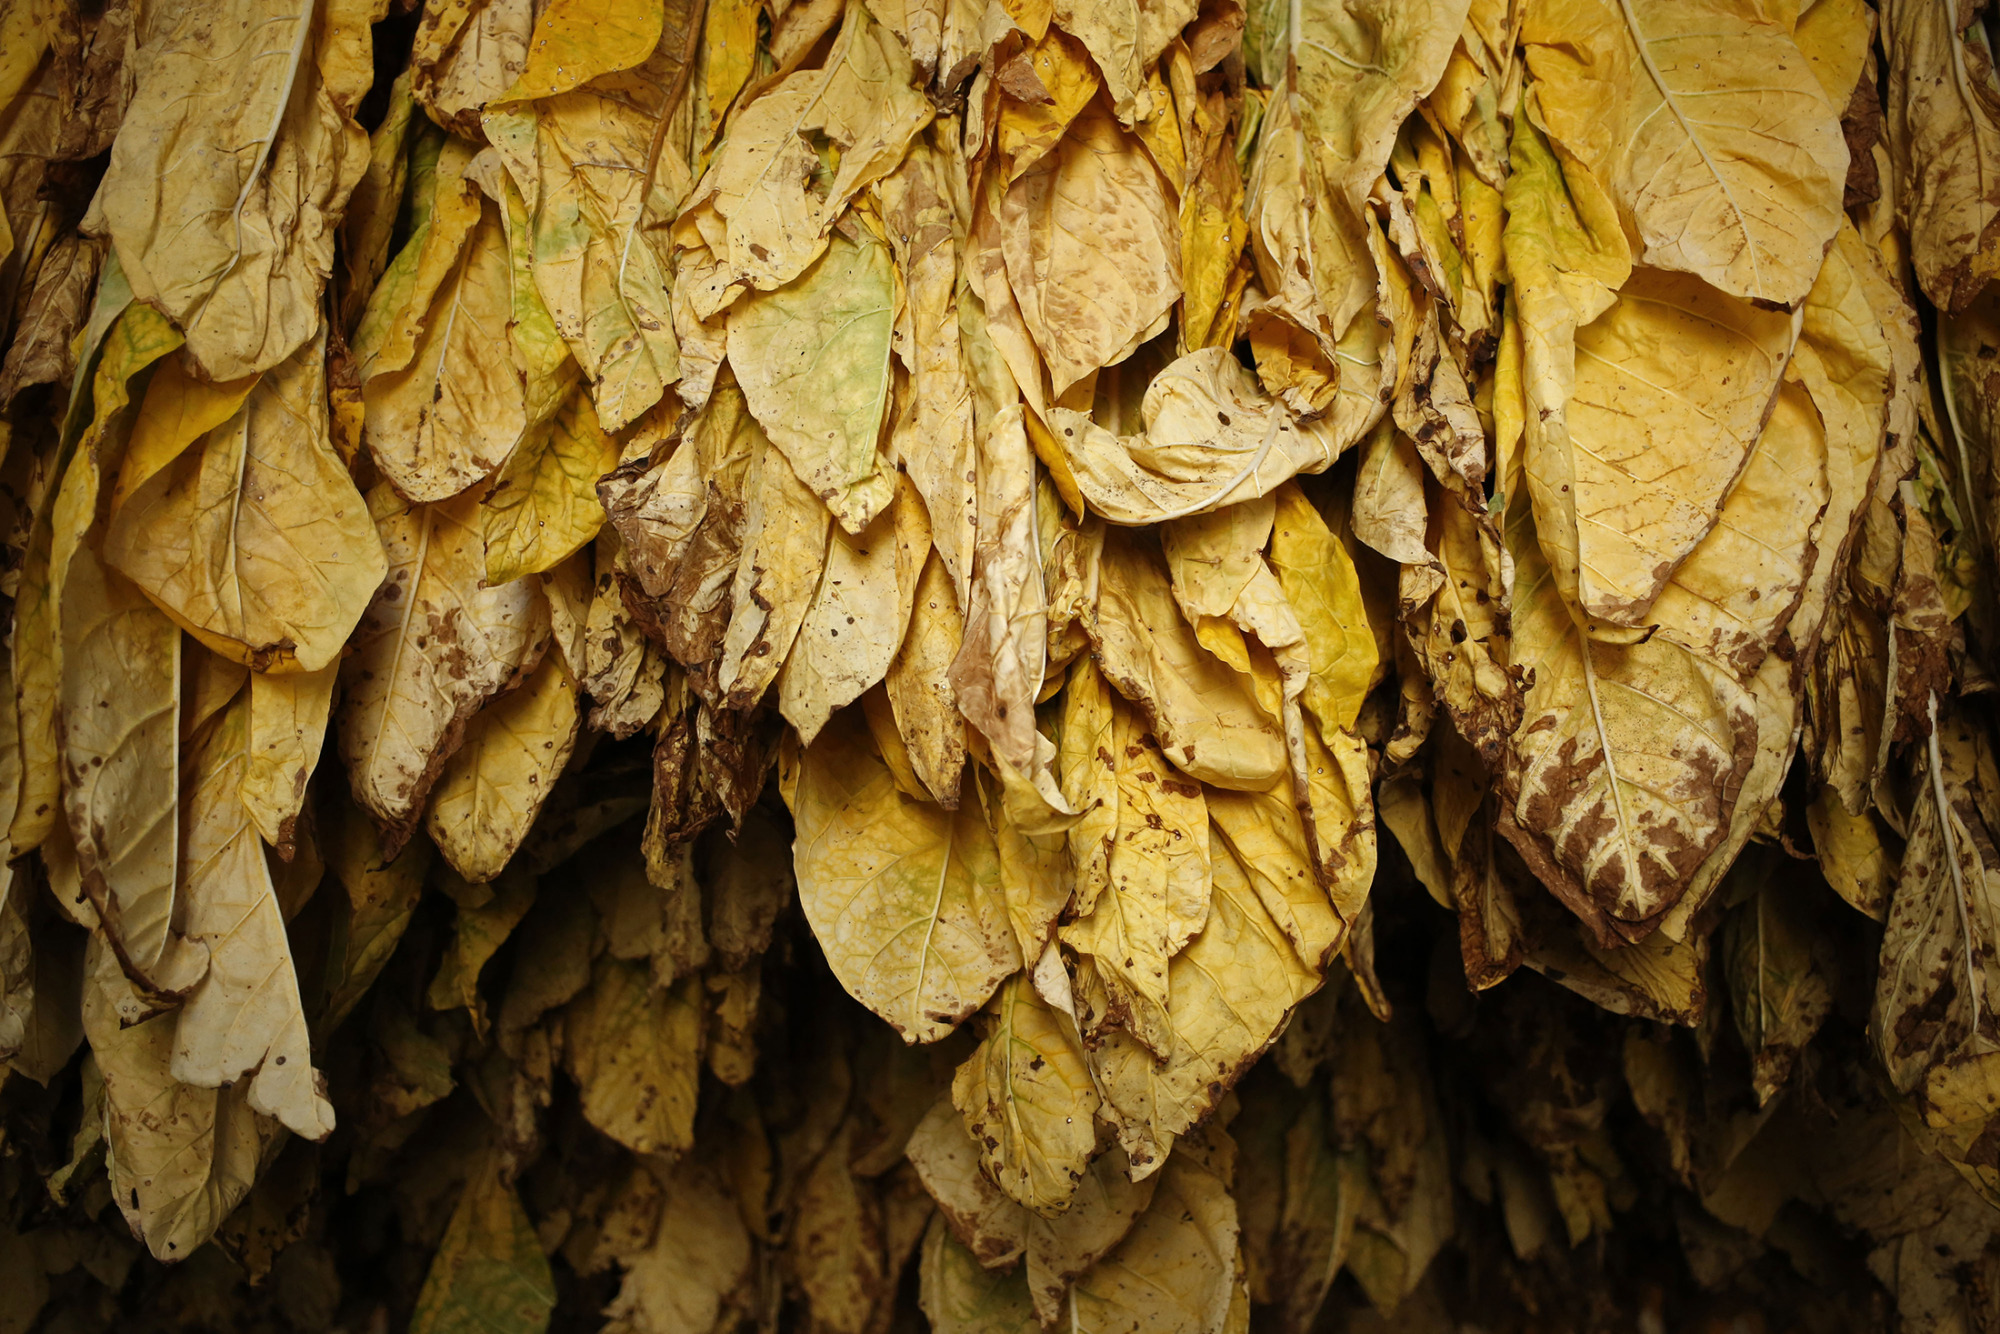 Burley tobacco grown by Langley Farms is seen after being hung to cure in a tobacco barn in Finchville, Kentucky, U.S., on Thursday, Sept. 17, 2015. More than two-thirds of adult smokers in the U.S. say they want to quit, and more than half have tried at least once. Since 2002, the country has been home to more former smokers than smokers, according to the Centers for Disease Control. Lucky for the tobacco industry, that's not the case around the globe.
